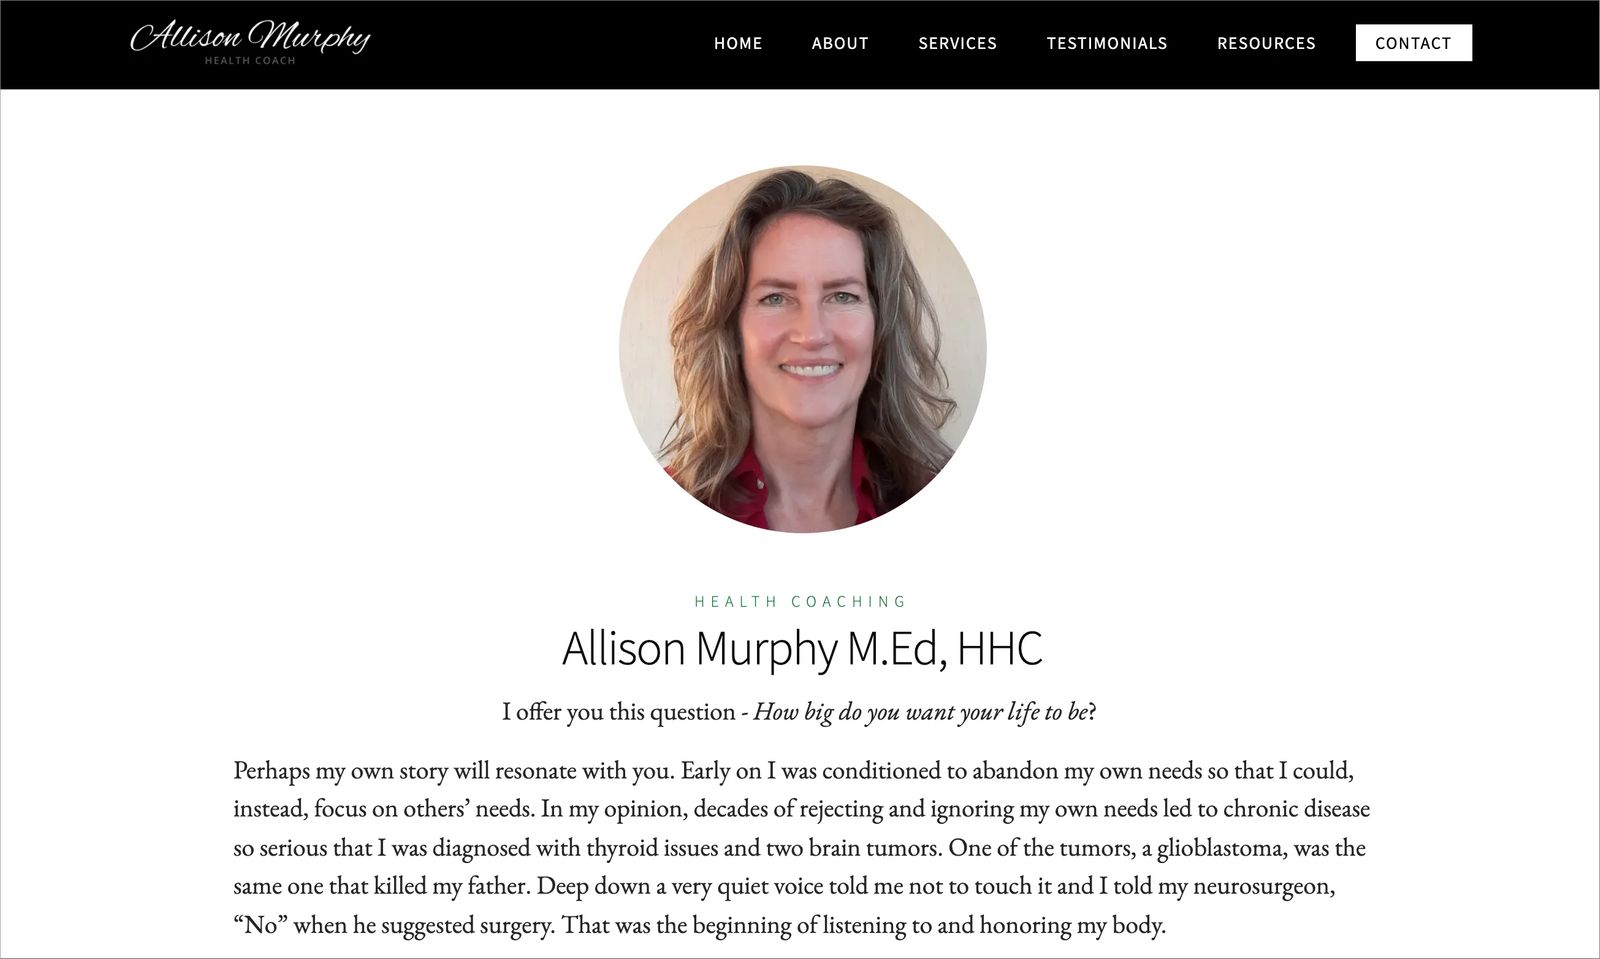 example of about page featuring allison murphy health coach